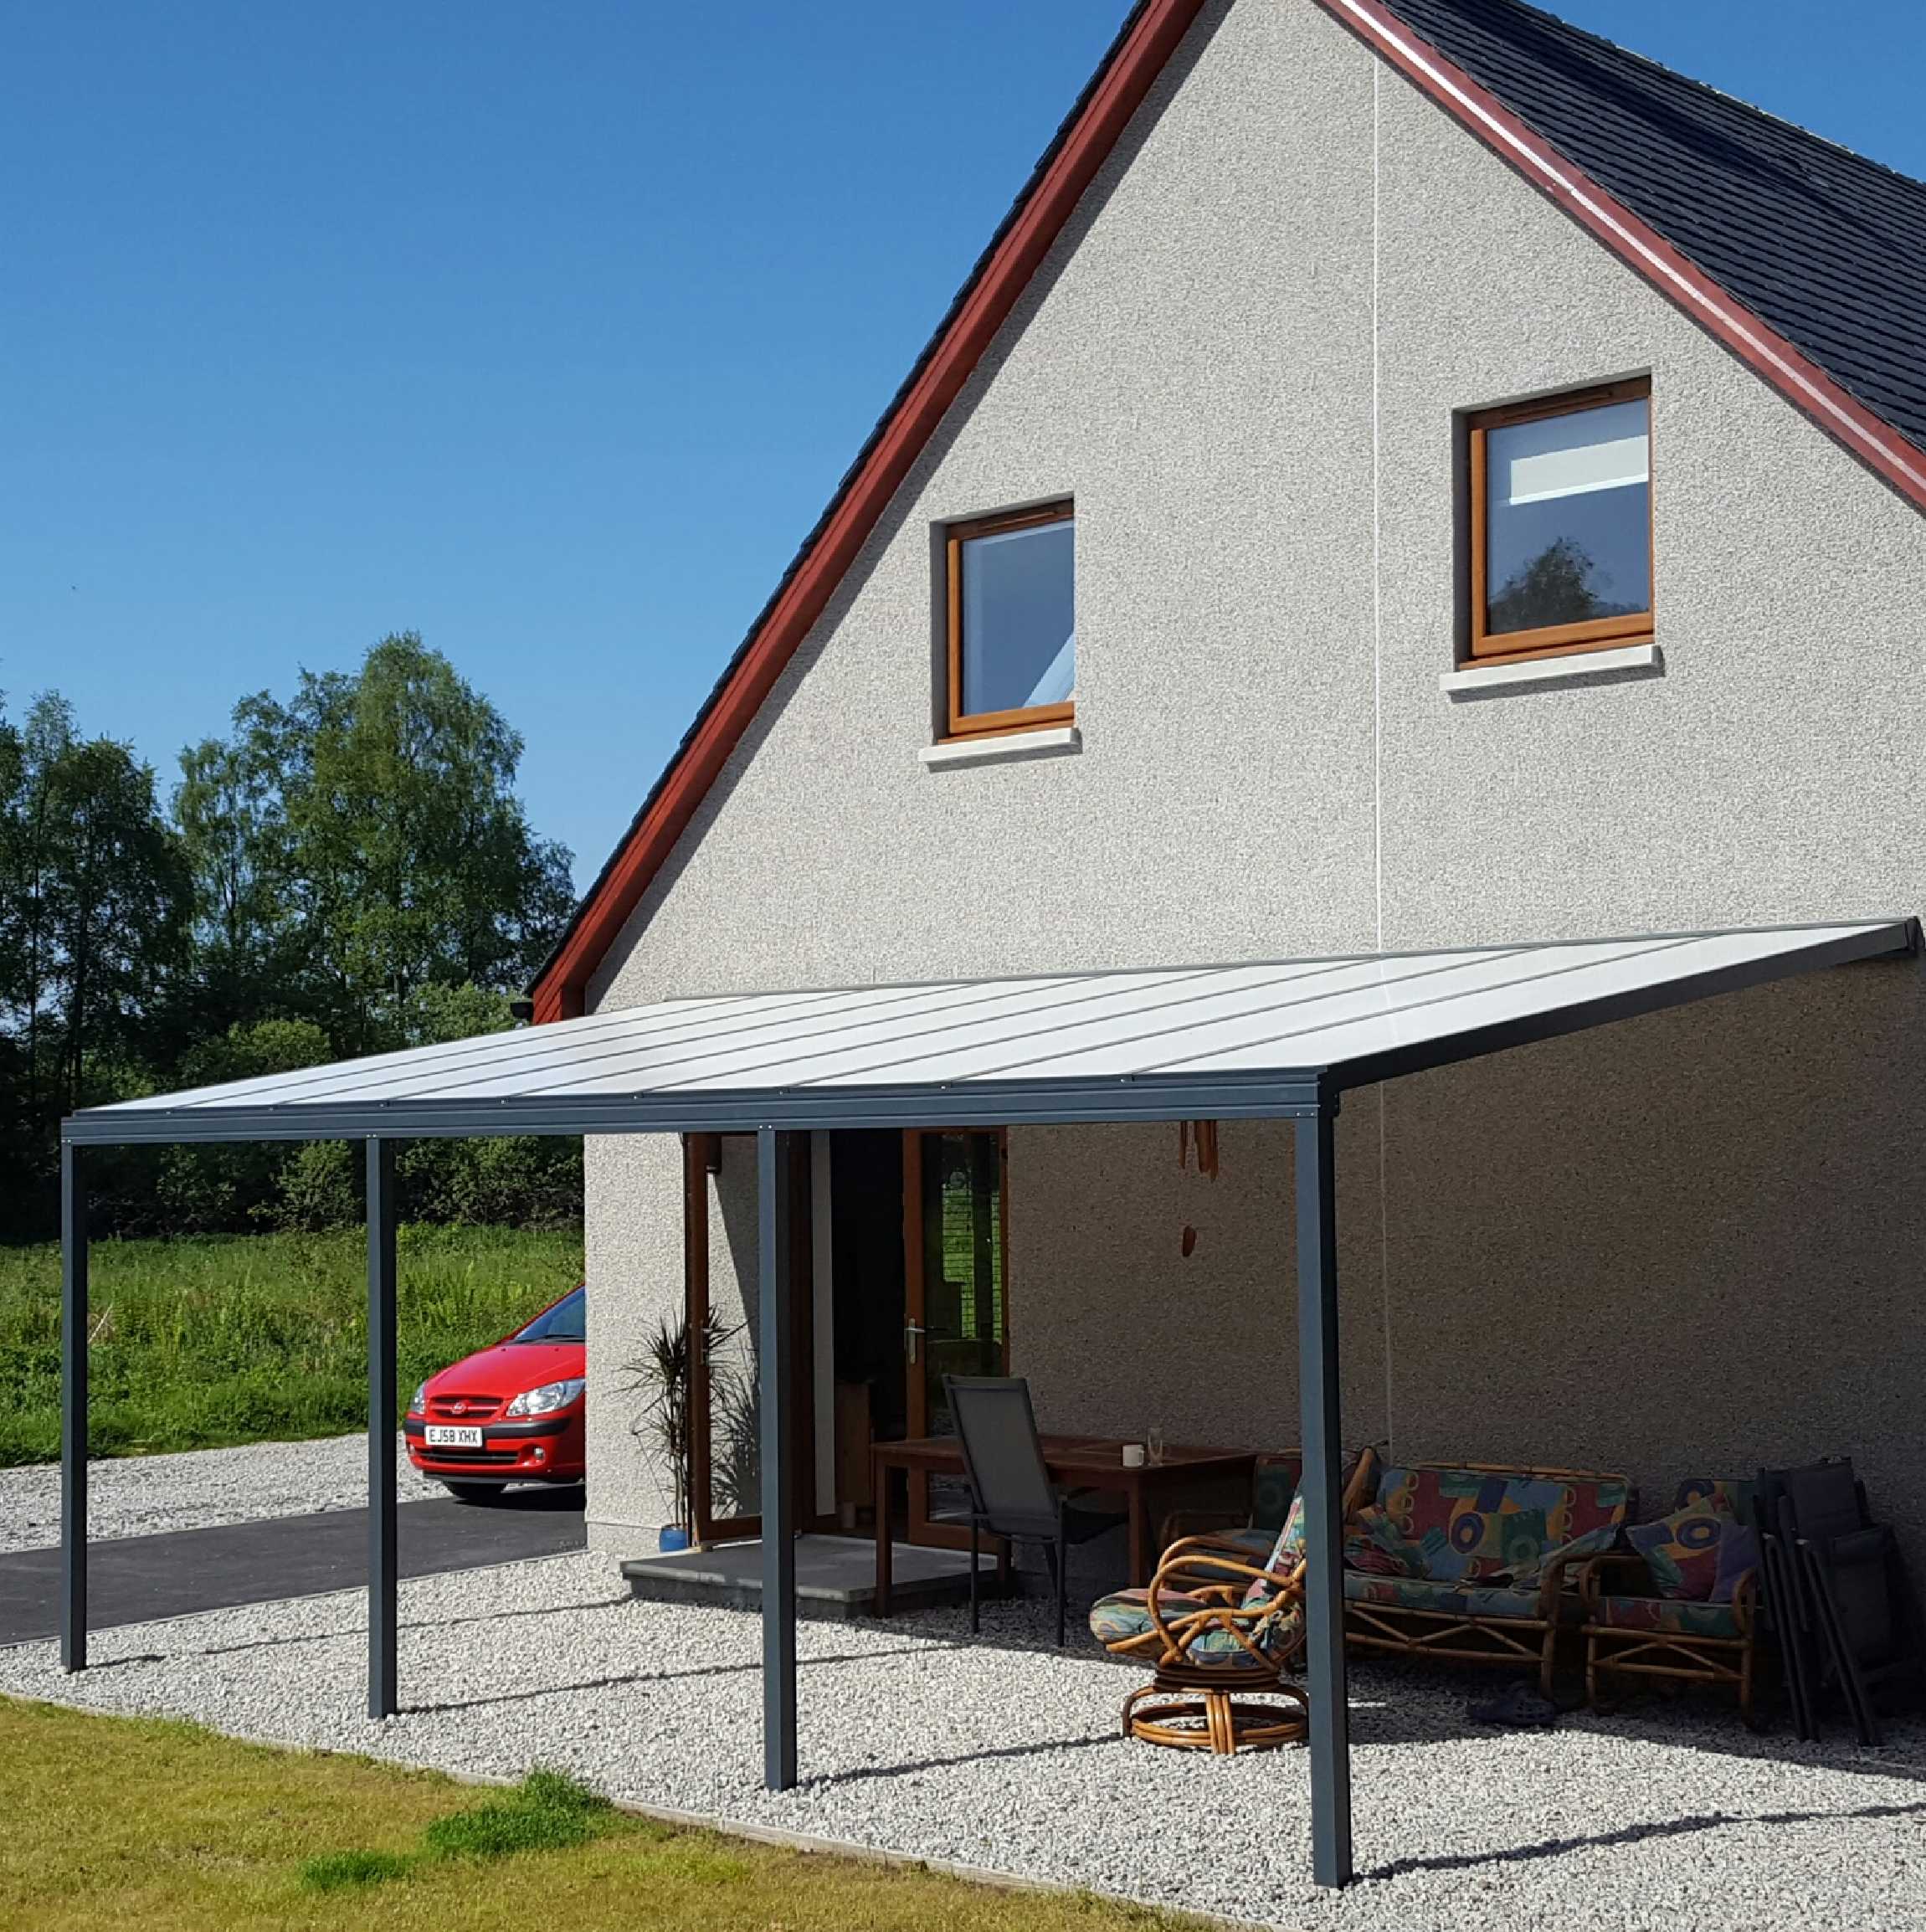 Great selection of Omega Smart Lean-To Canopy, Anthracite Grey, 16mm Polycarbonate Glazing - 7.0m (W) x 3.5m (P), (4) Supporting Posts